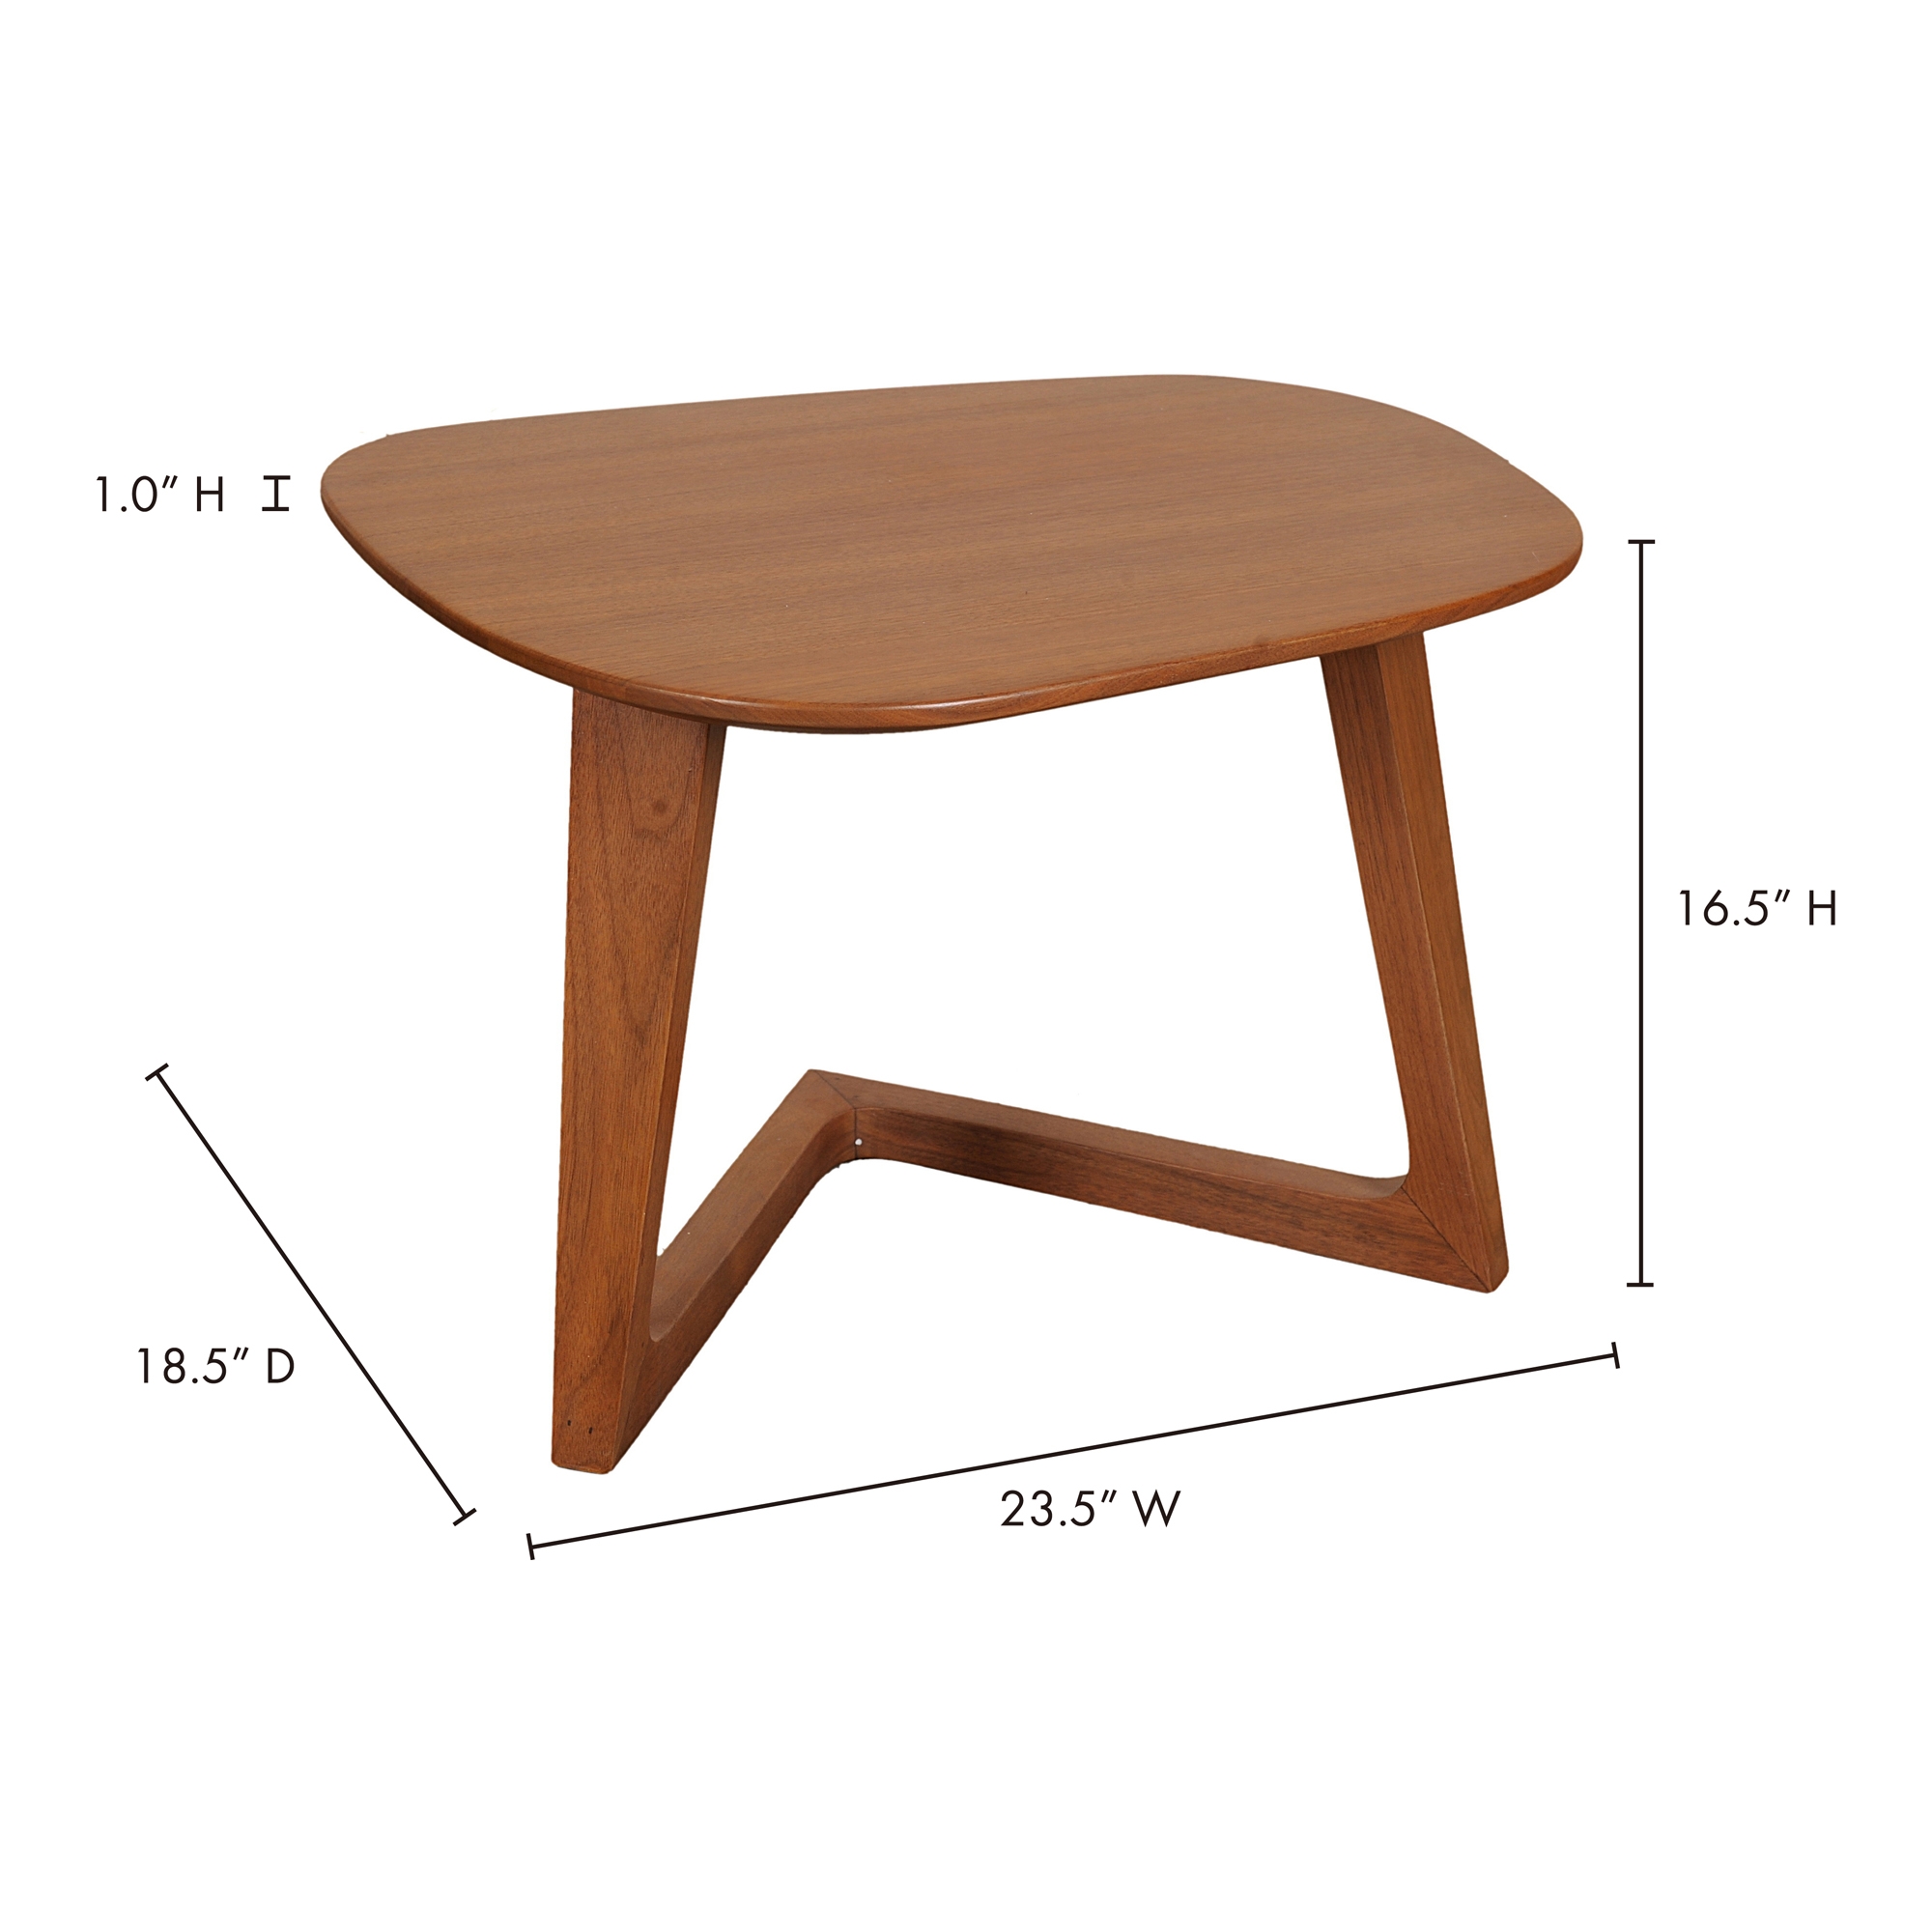 GODENZA END TABLE - Image 10